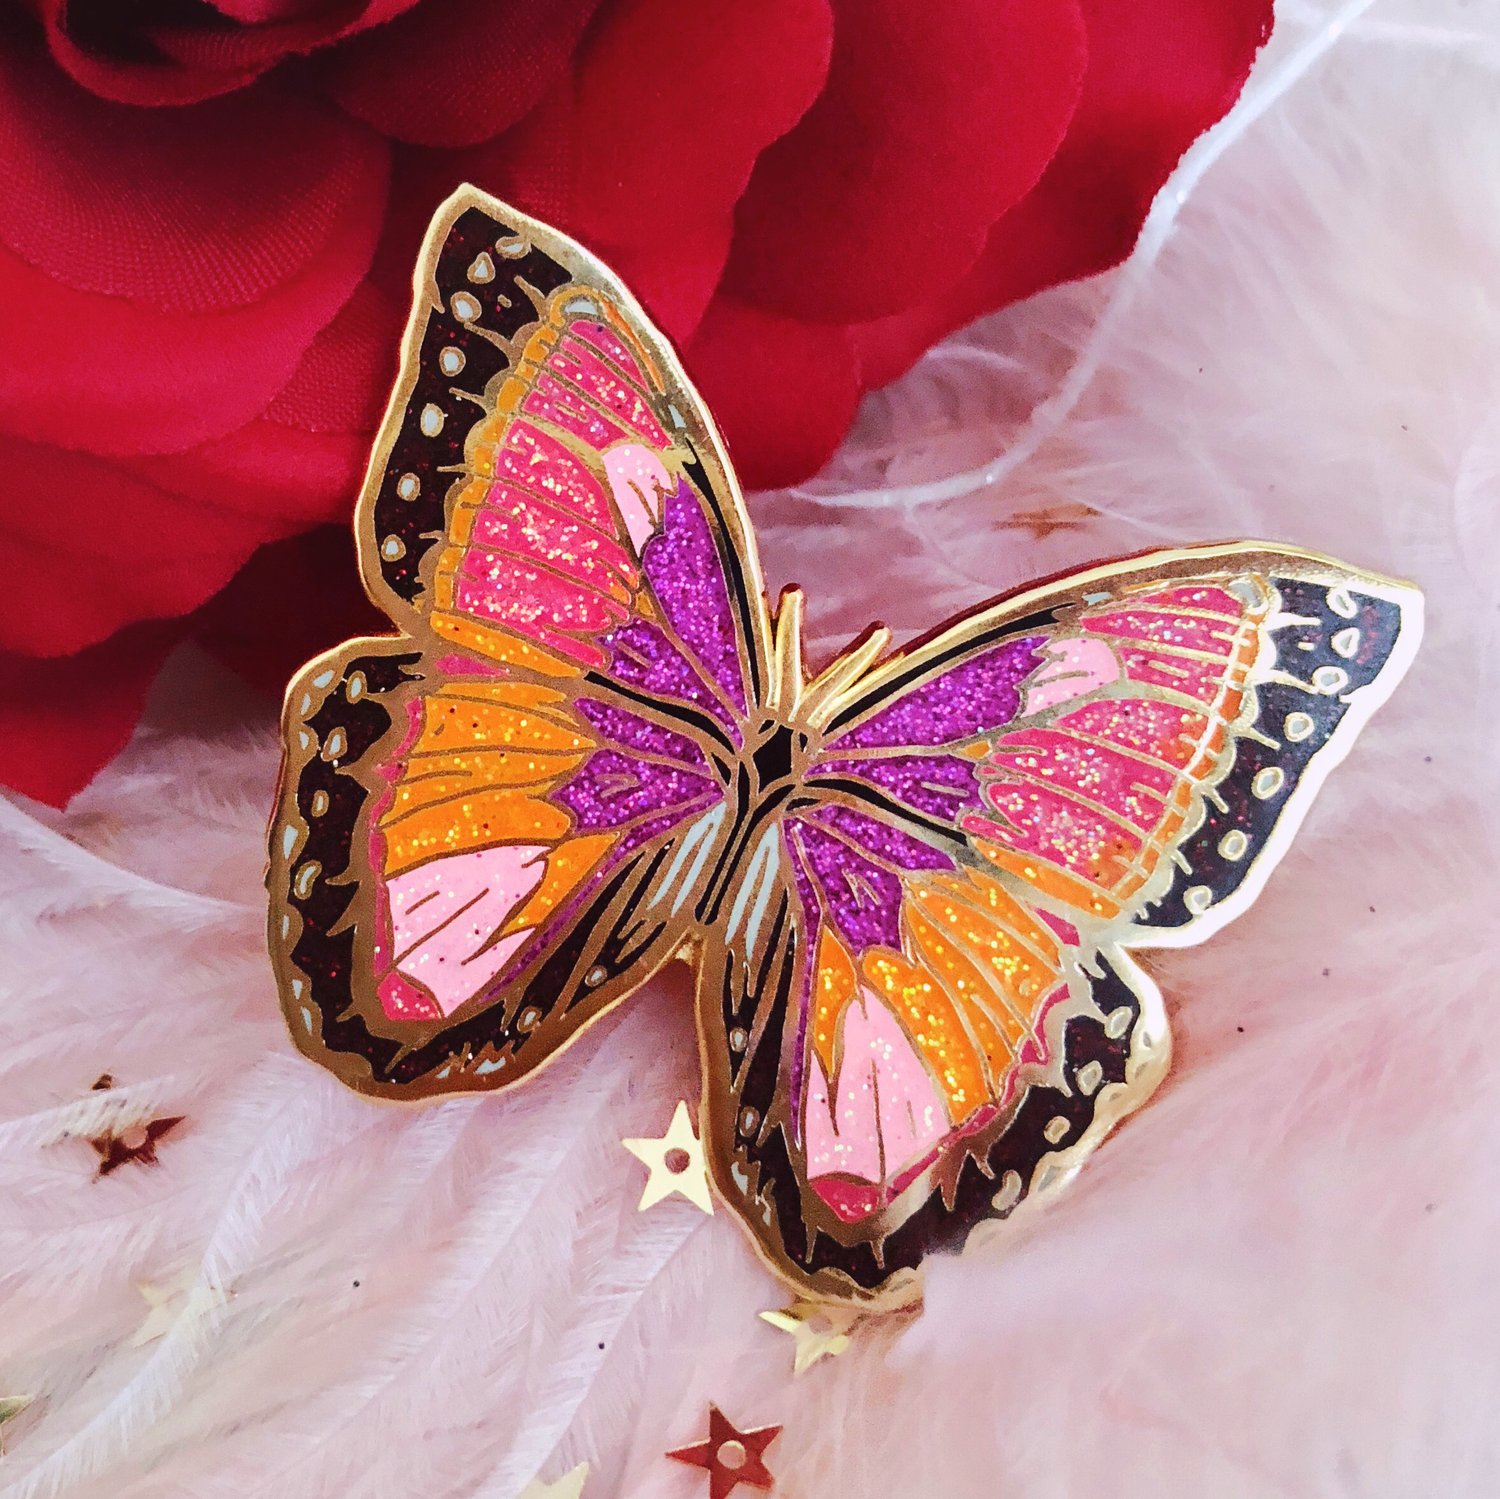 Butterfly Fairy Enamel Pins Animal Insect Lapel Pin for Clothes Metal  Badges